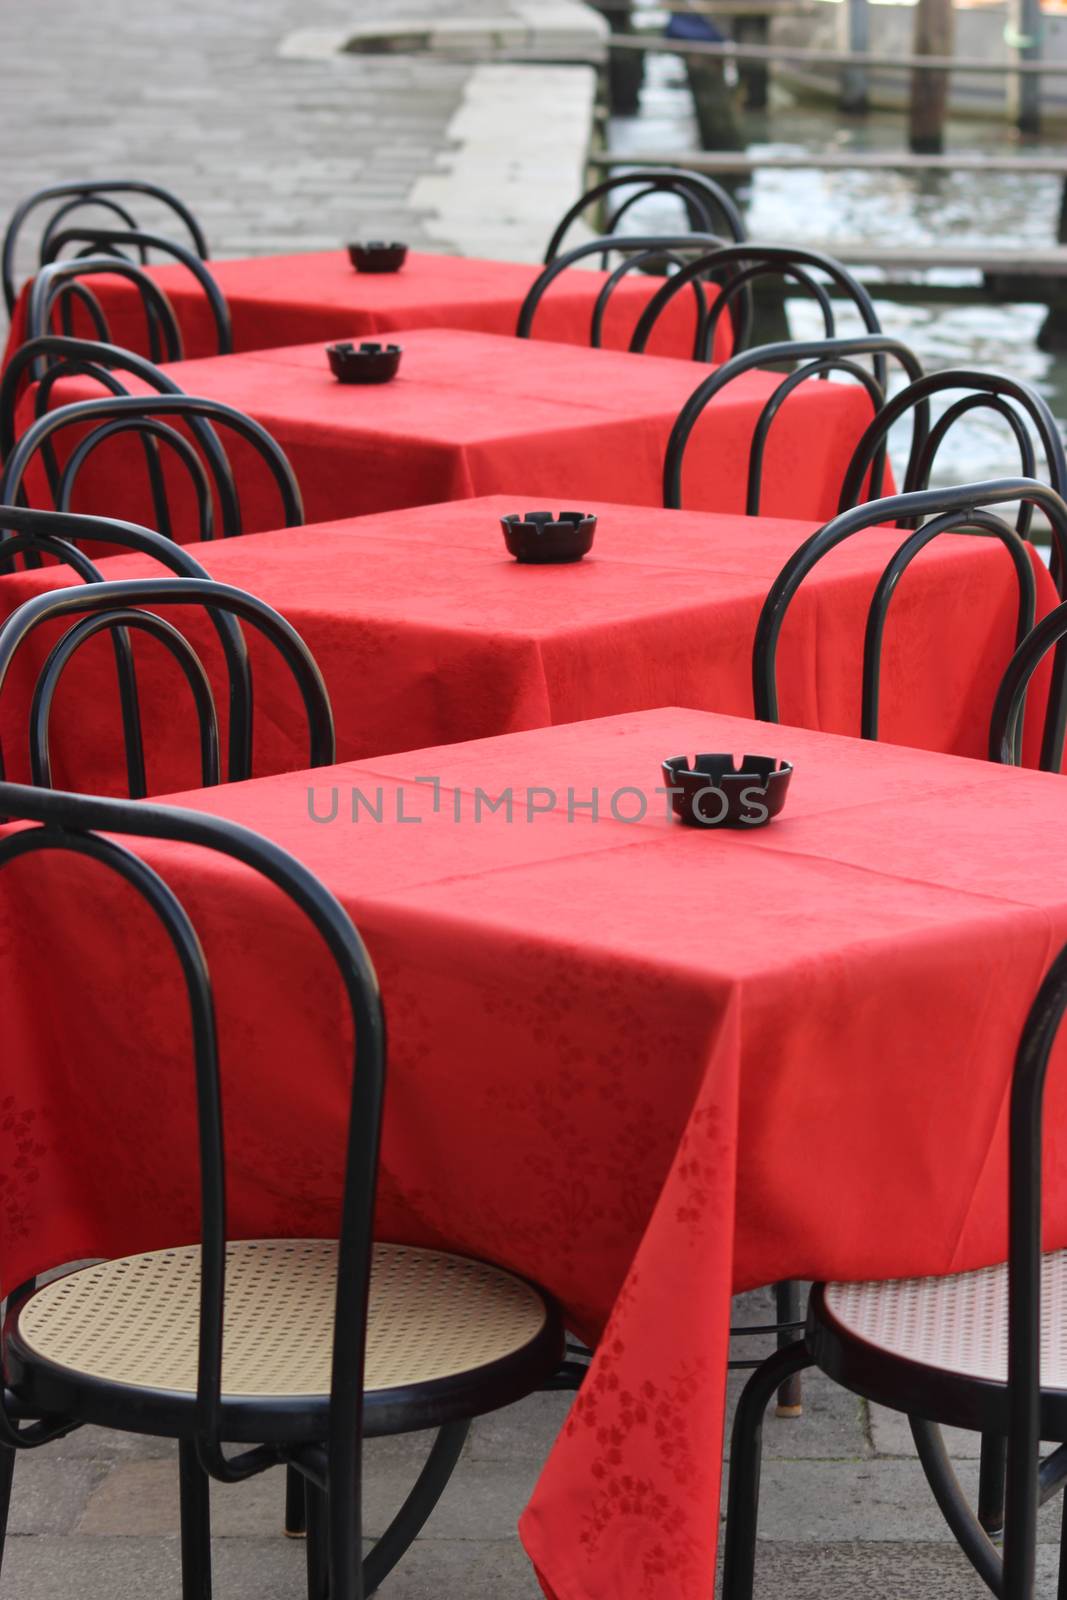 Restaurant tables and chairs by bensib